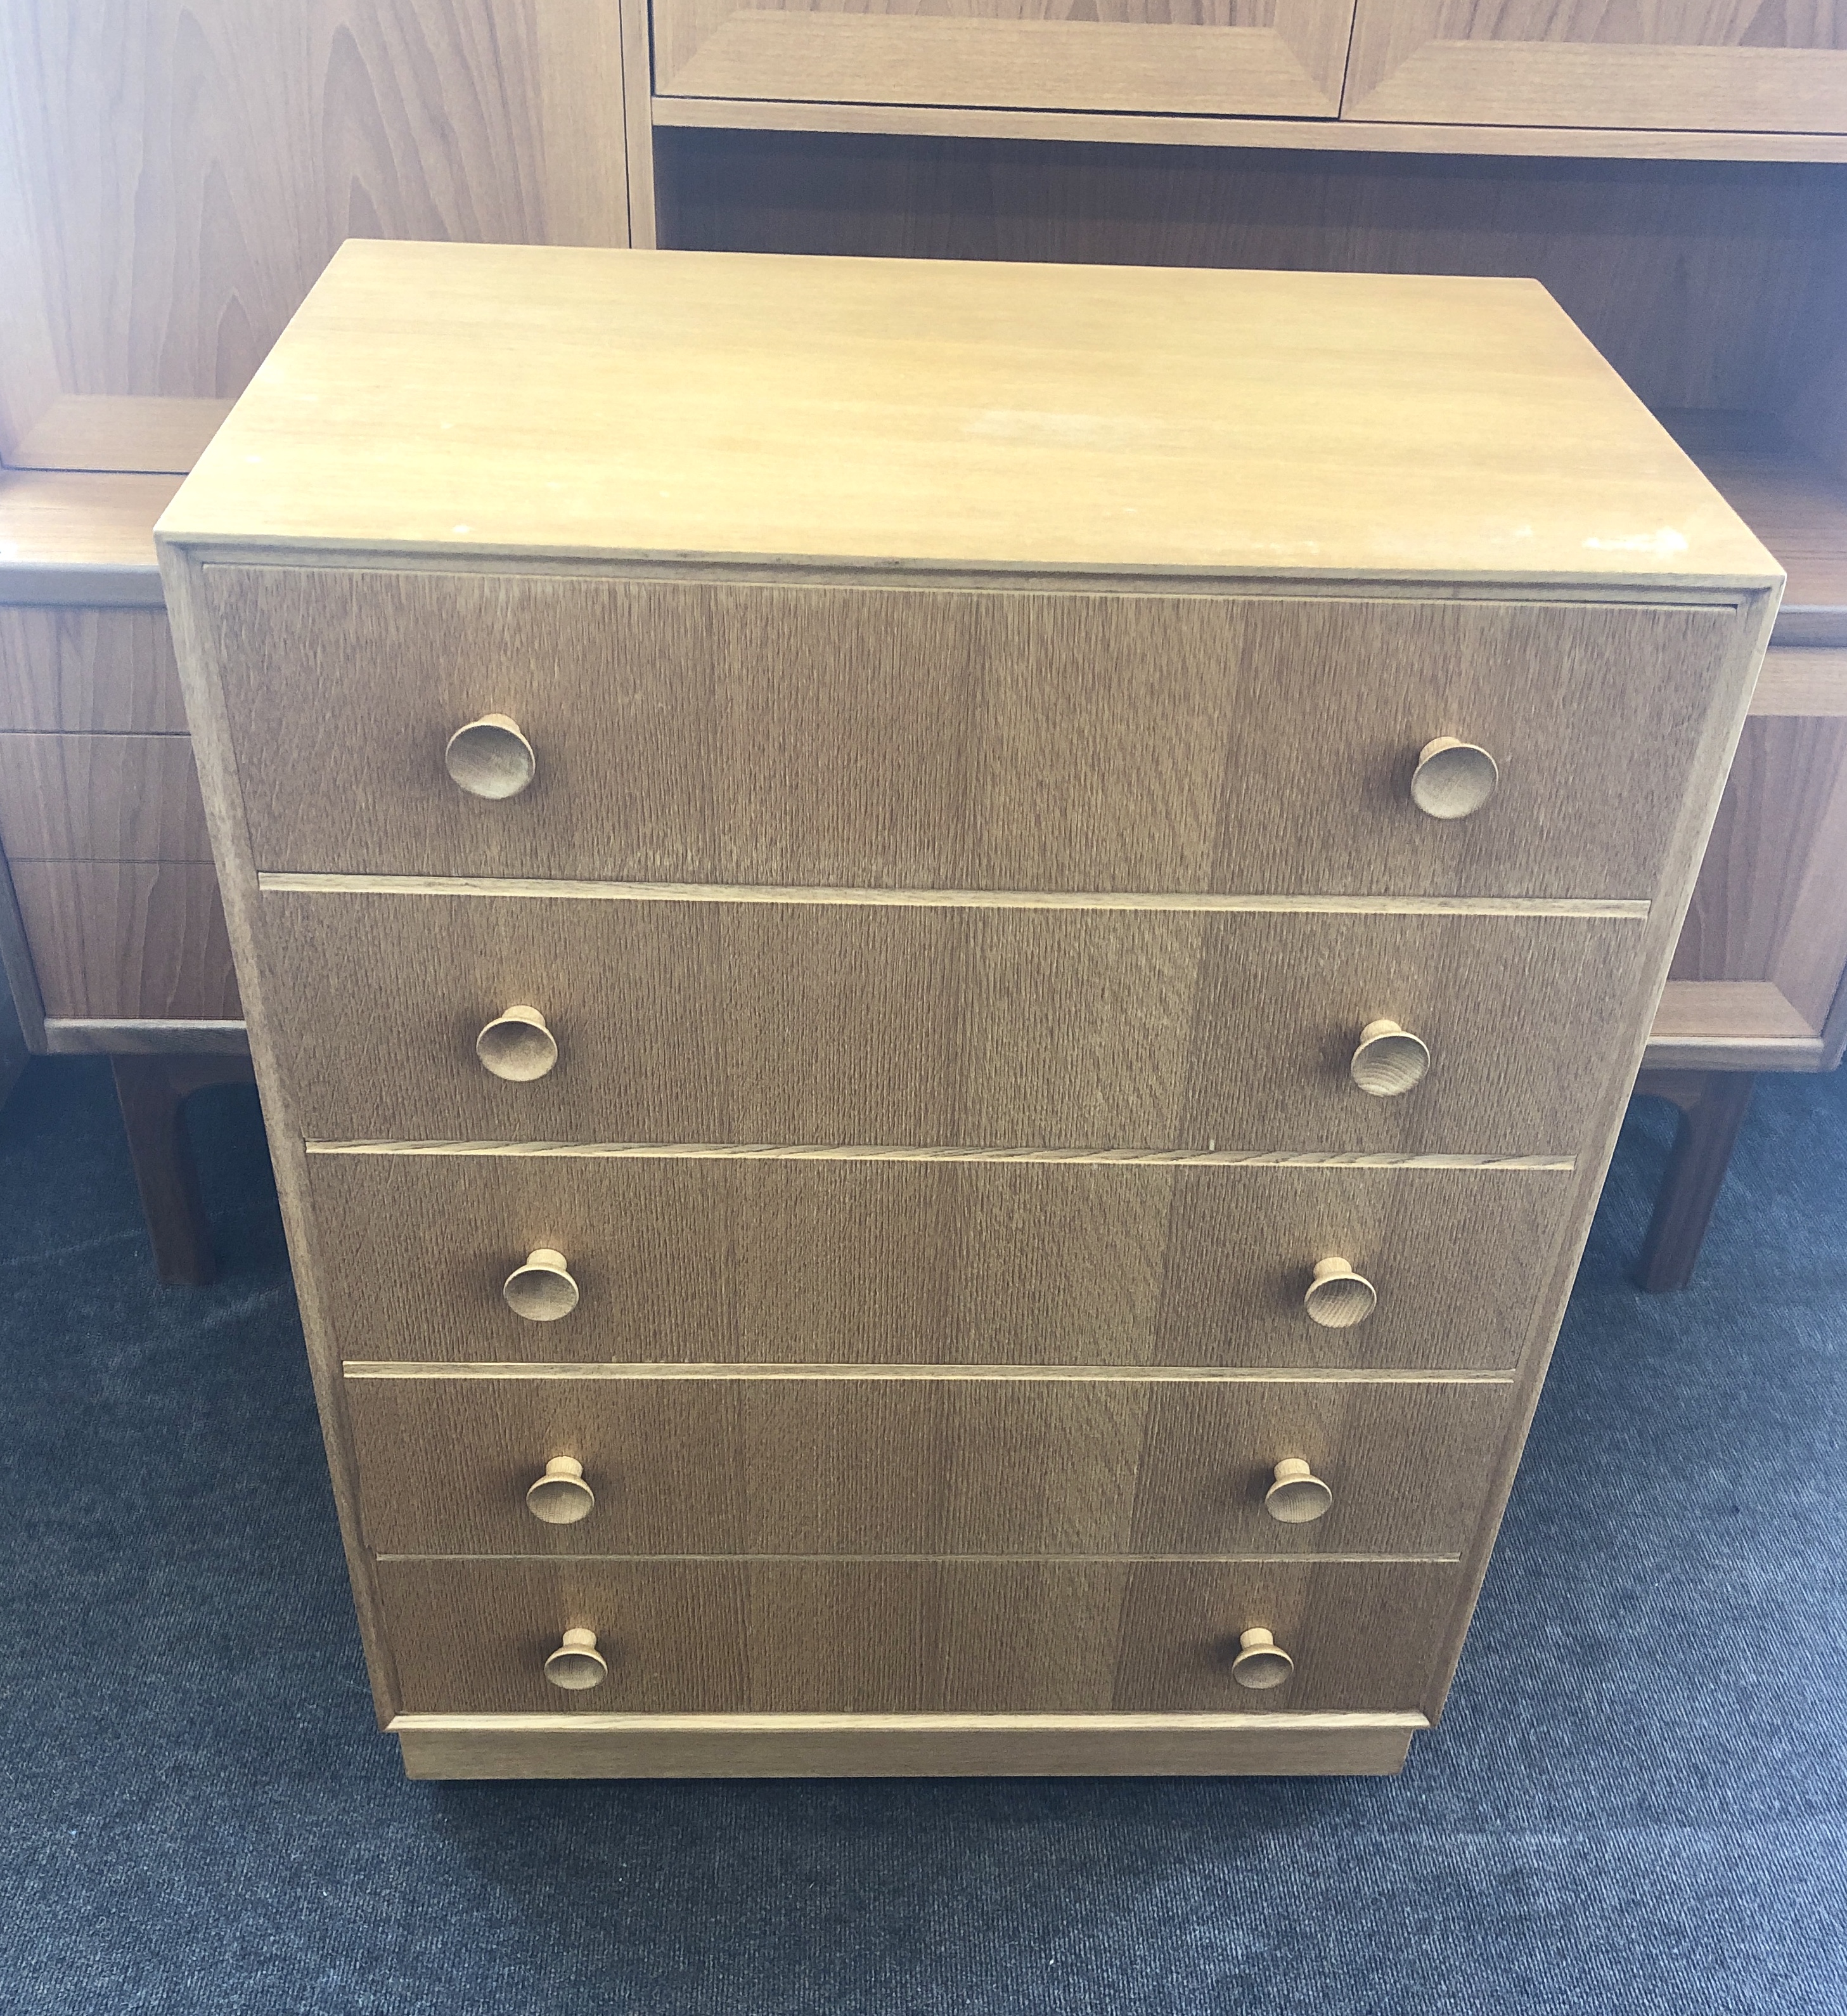 Retro light oak five draw chest of draws, measures approx width 30" depth 18" height 40"